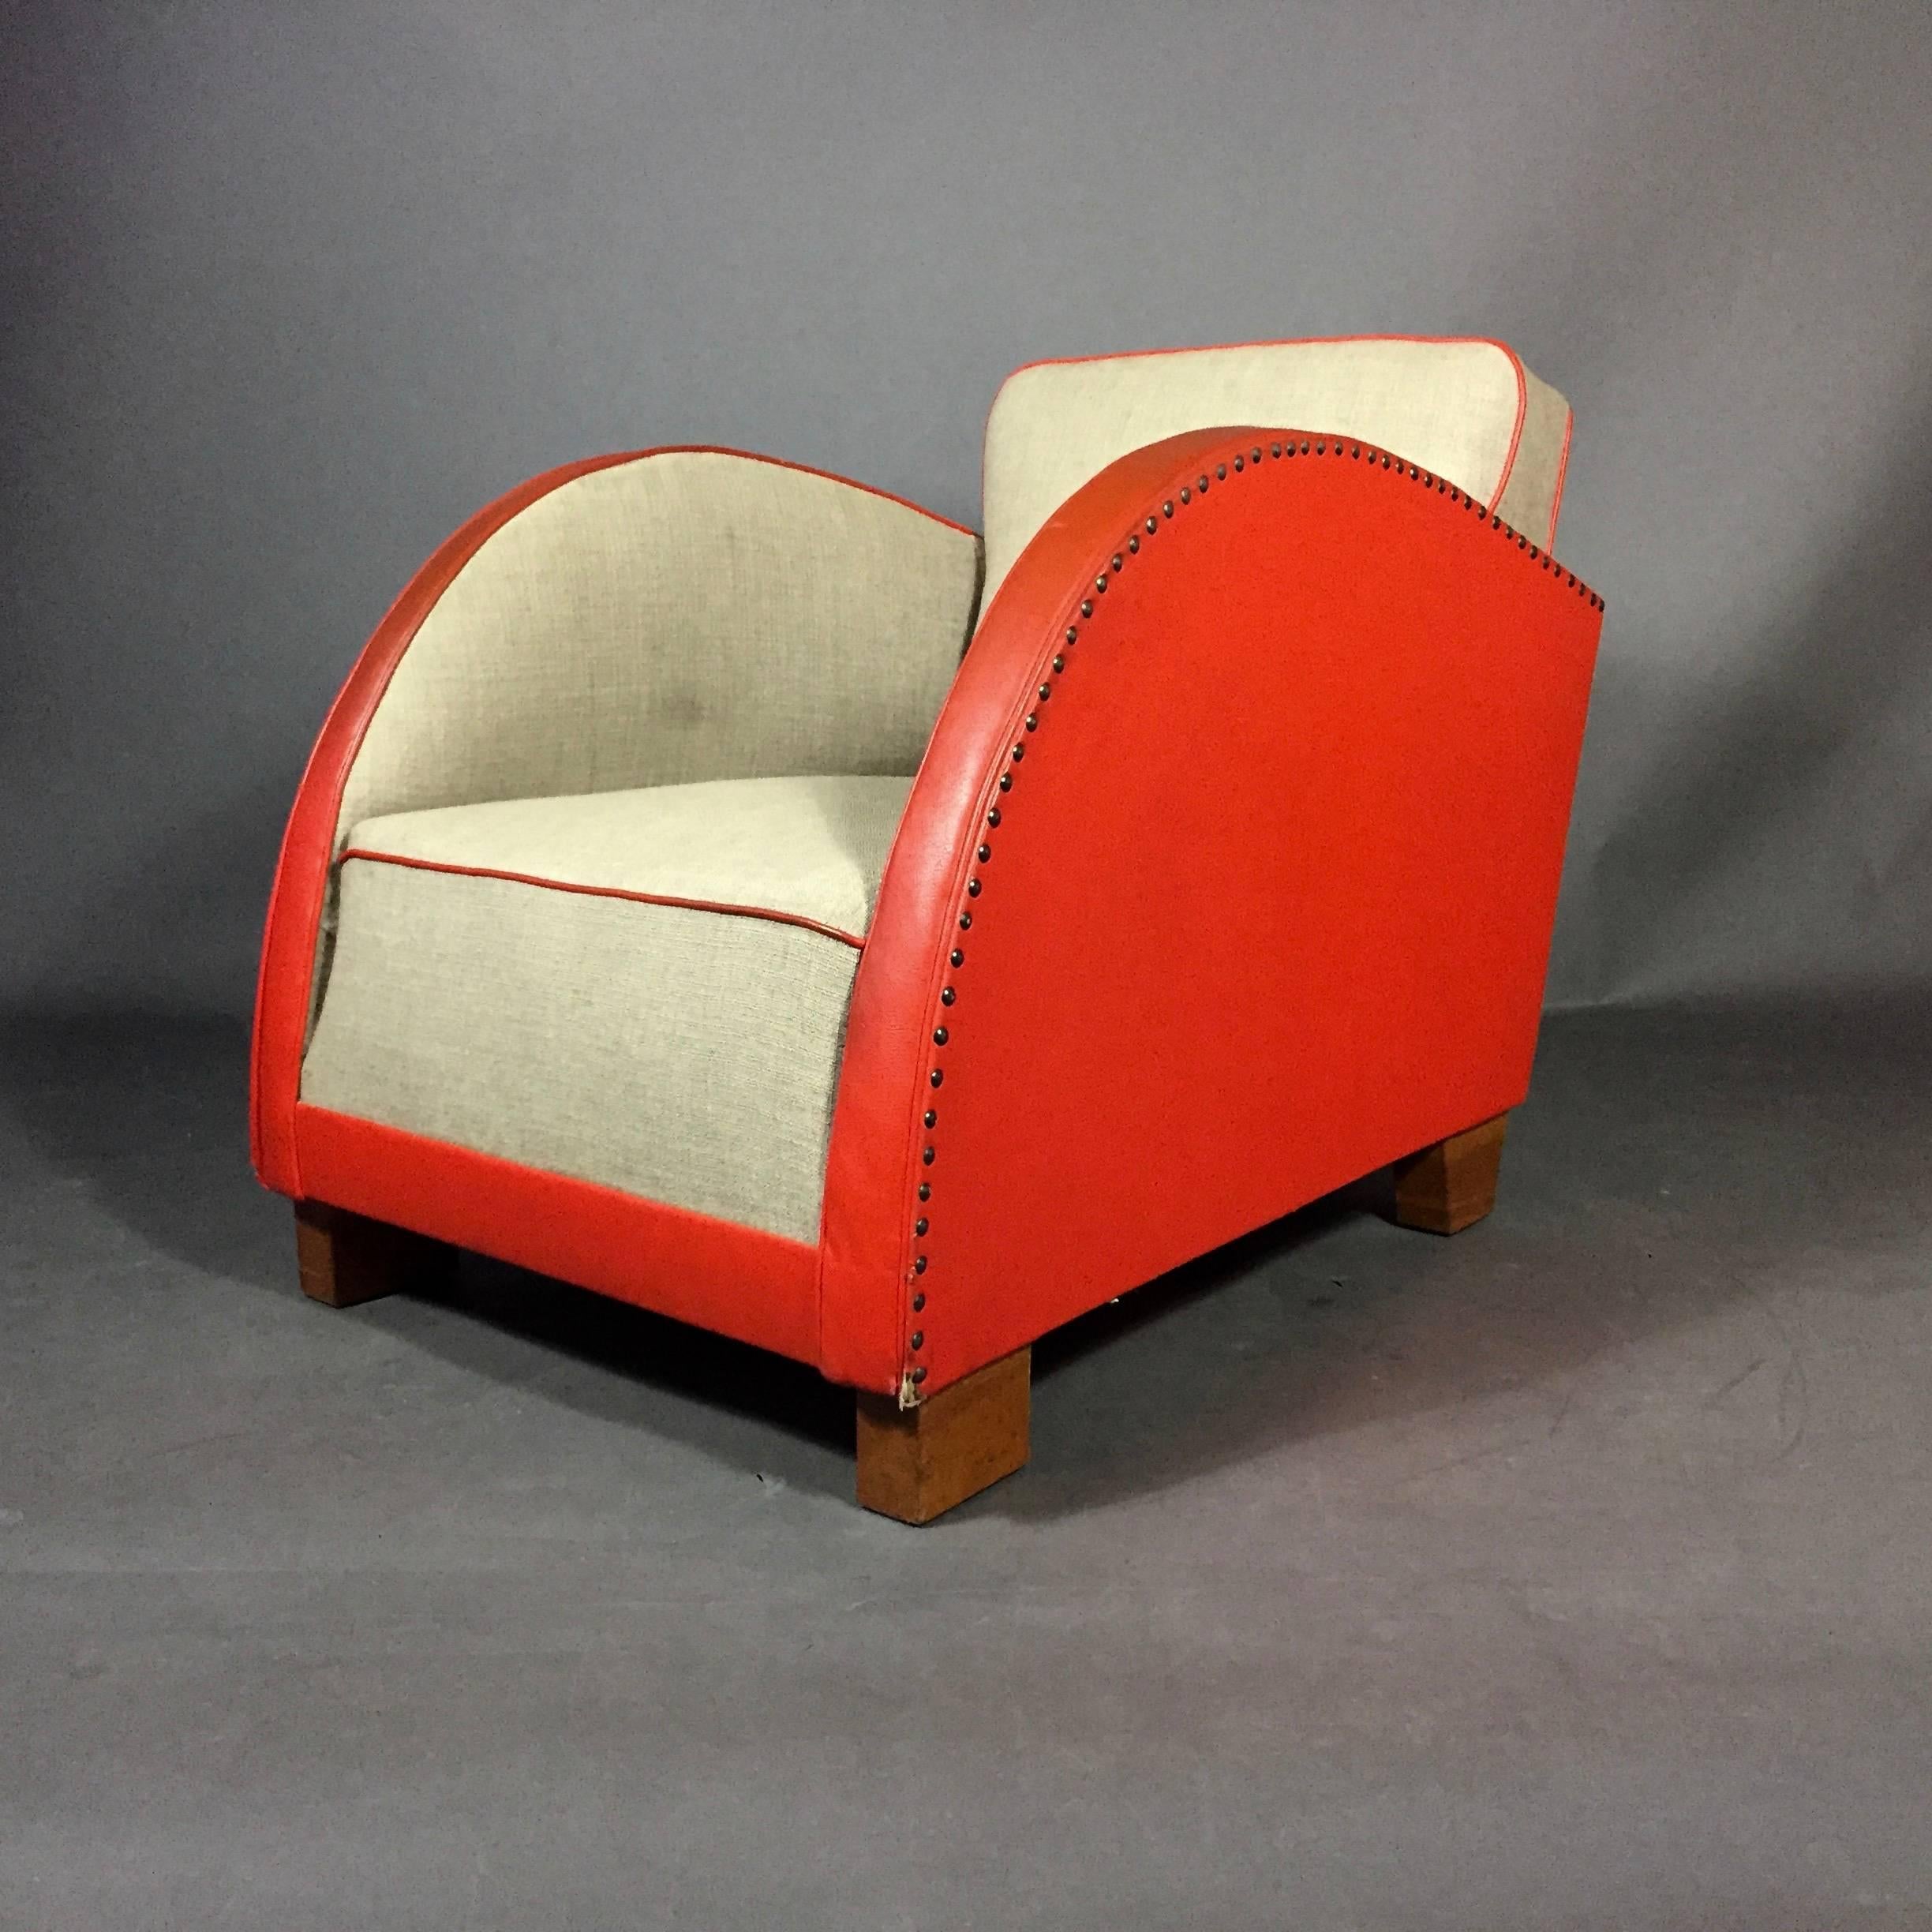 Spectacular is the visual sweep of arm on this diminutive club chair with original and early usage of Naugahyde - a prefect and vibrant red/orange. Wide woven weed wool fabric to seating with contrast red piping and brass tacks to sides. Very solid